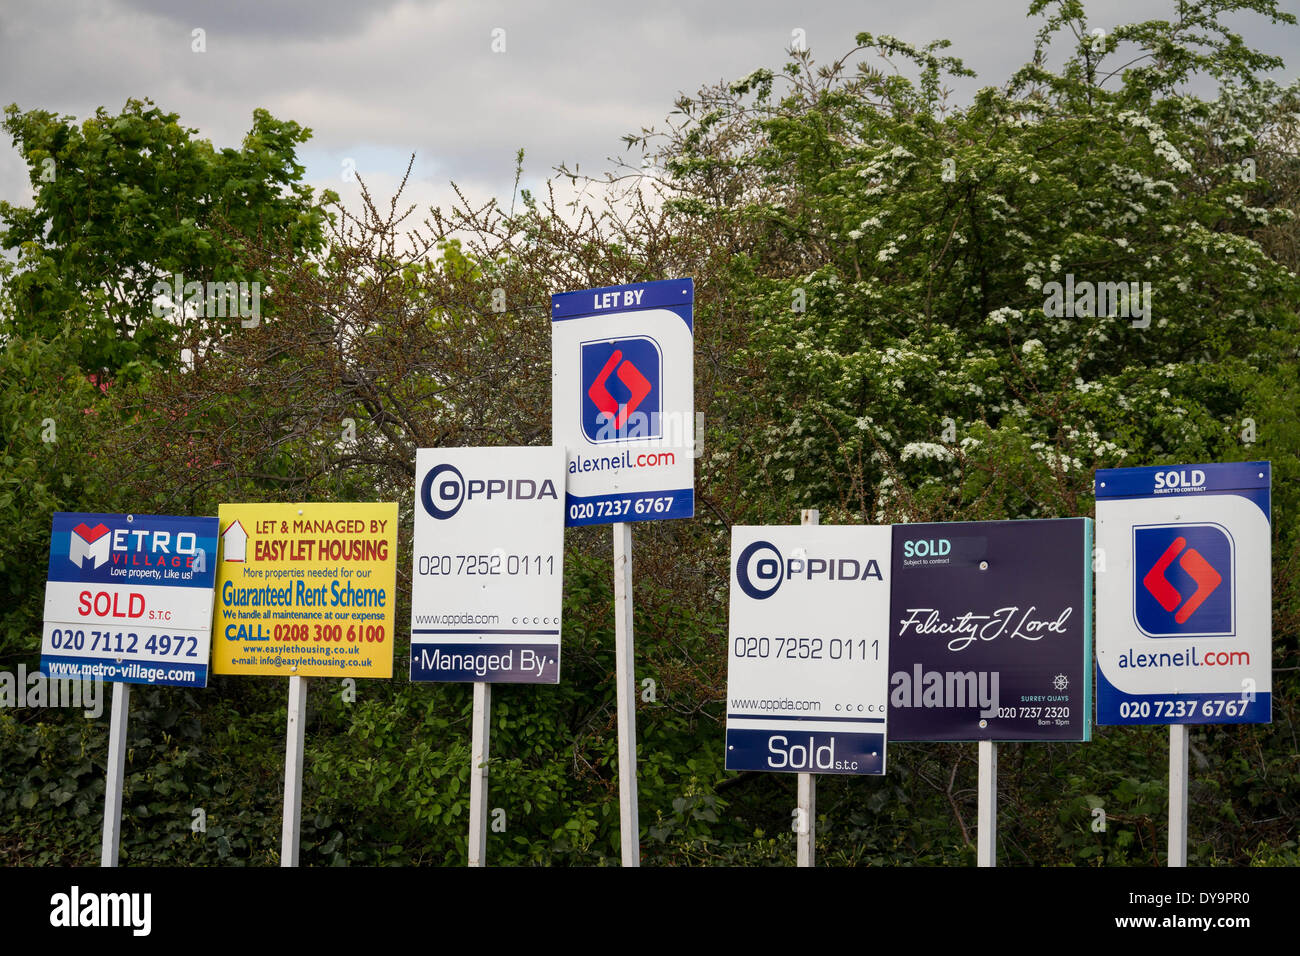 Estate agents boards advertising sales or rentals seen in south east London, UK. Stock Photo